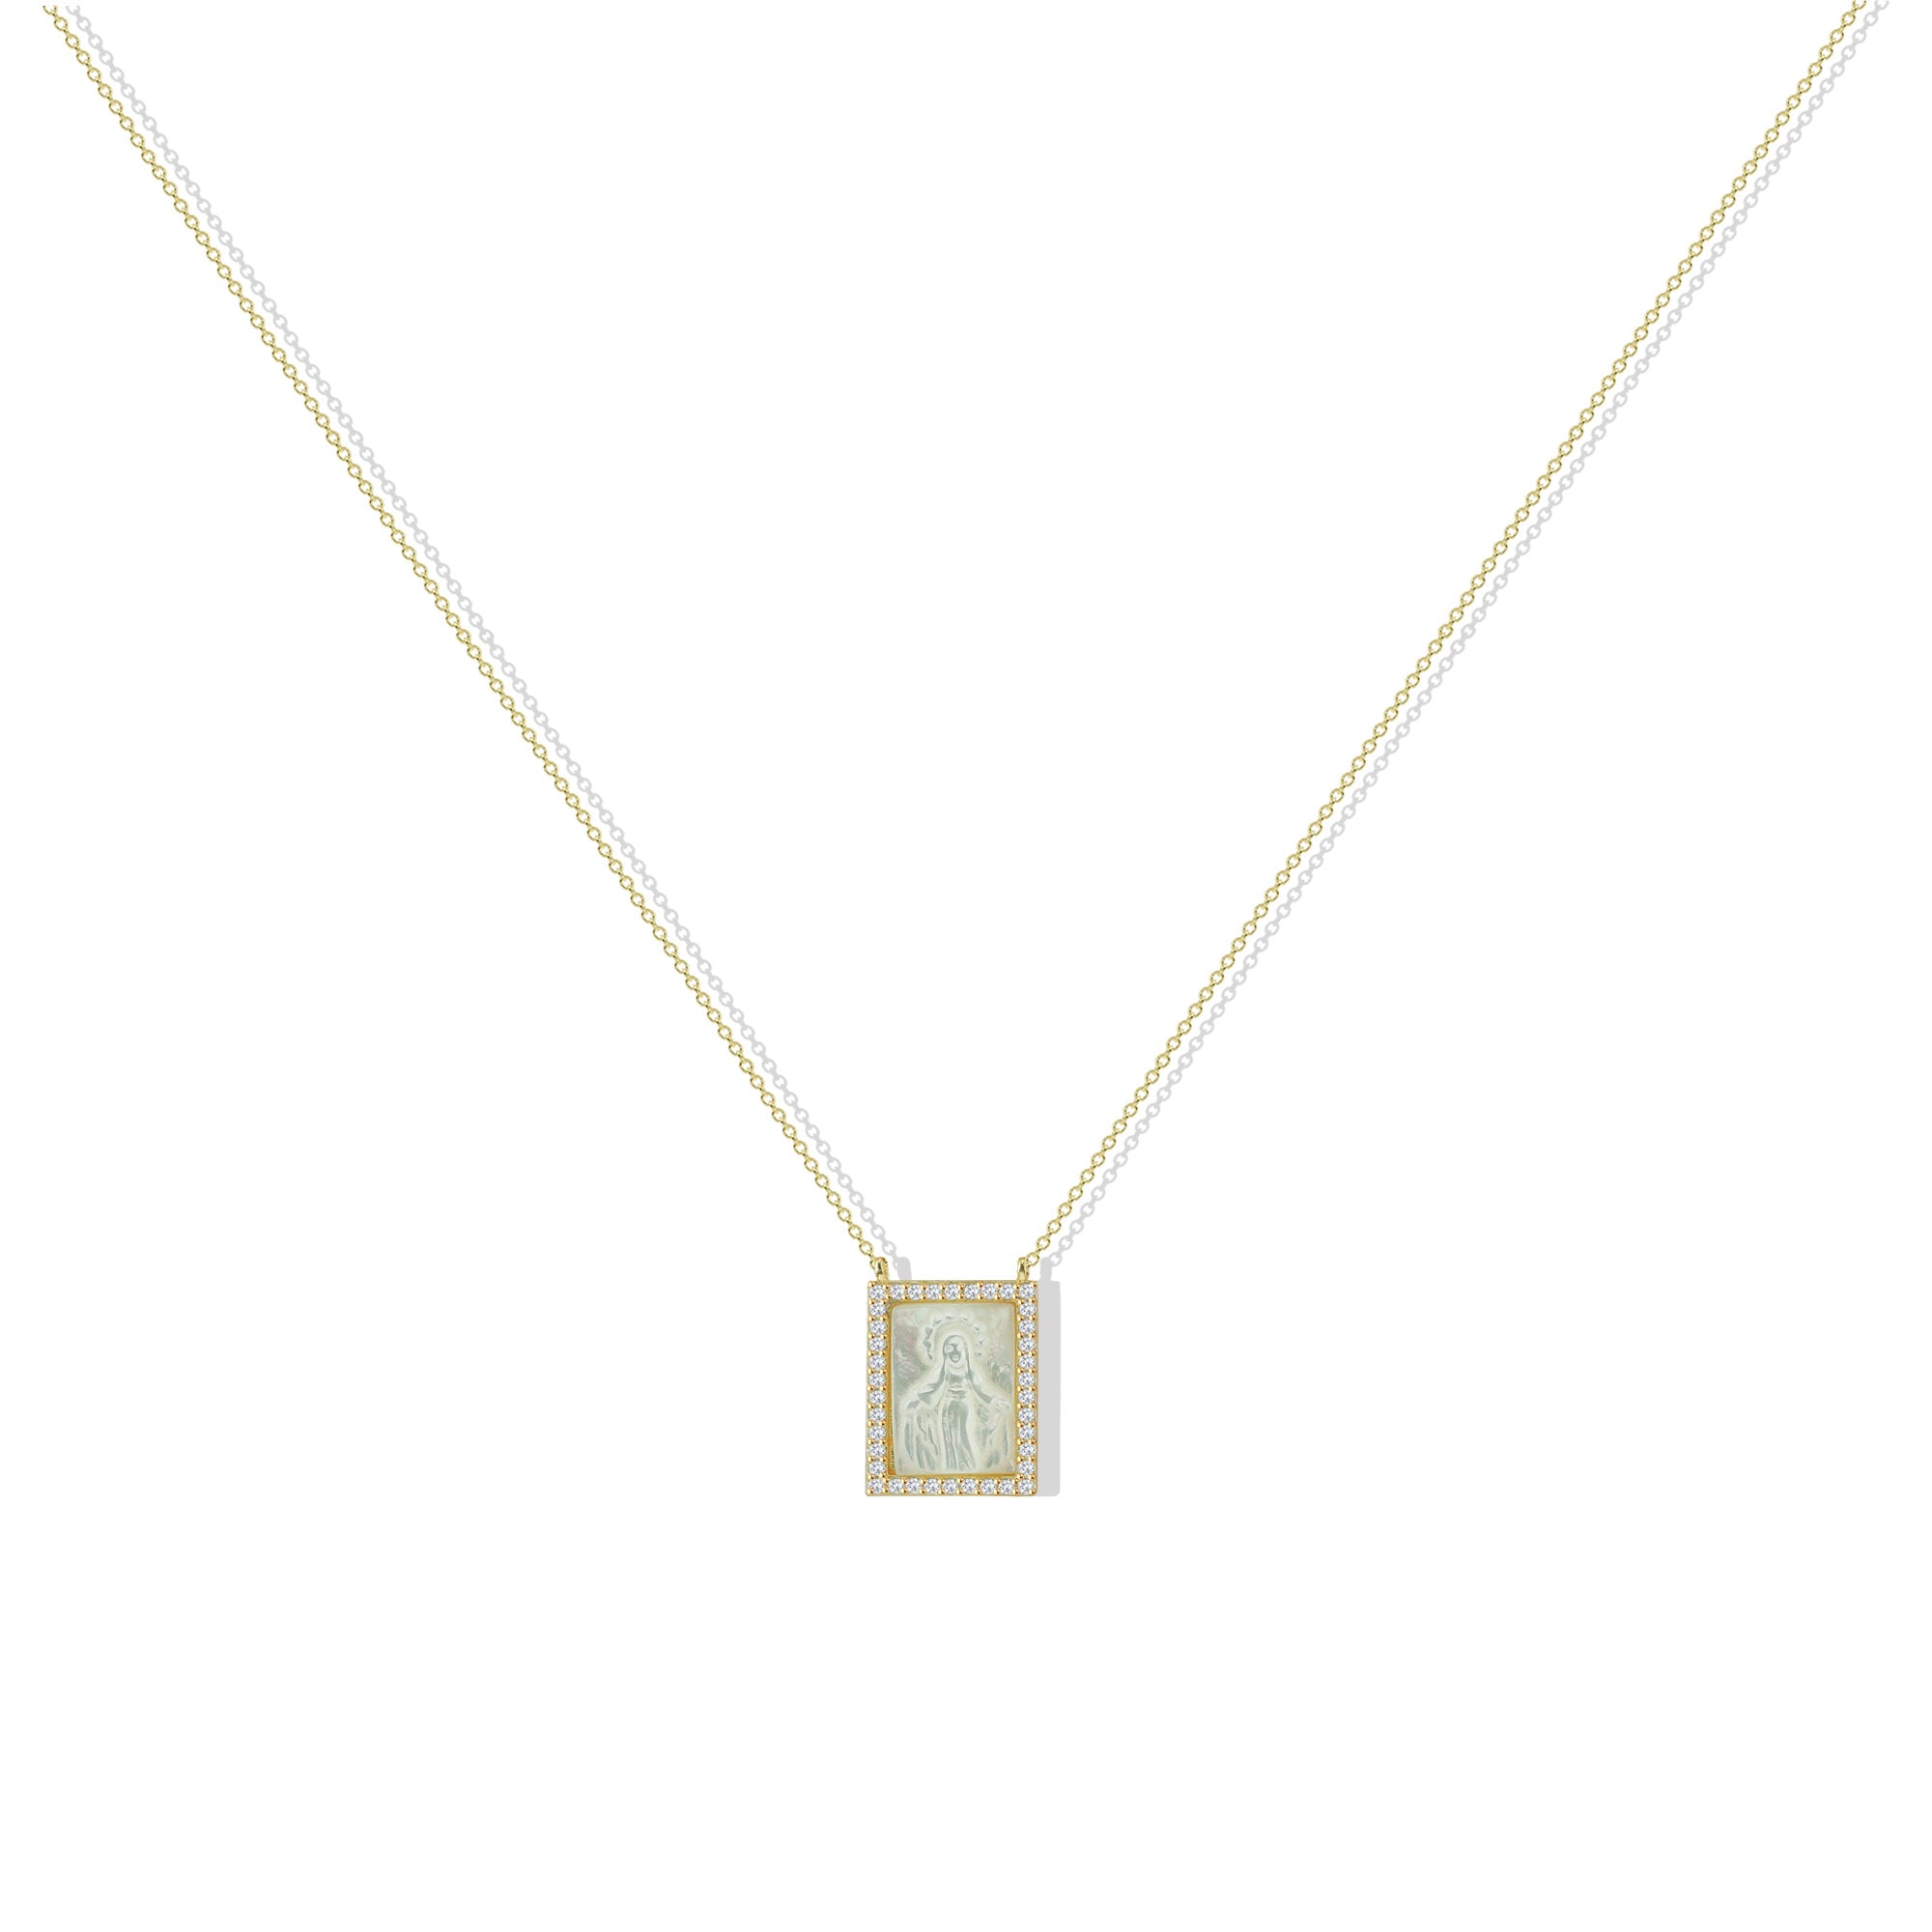 THE MOTHER OF PEARL VIRGIN MARY SQUARE PENDANT